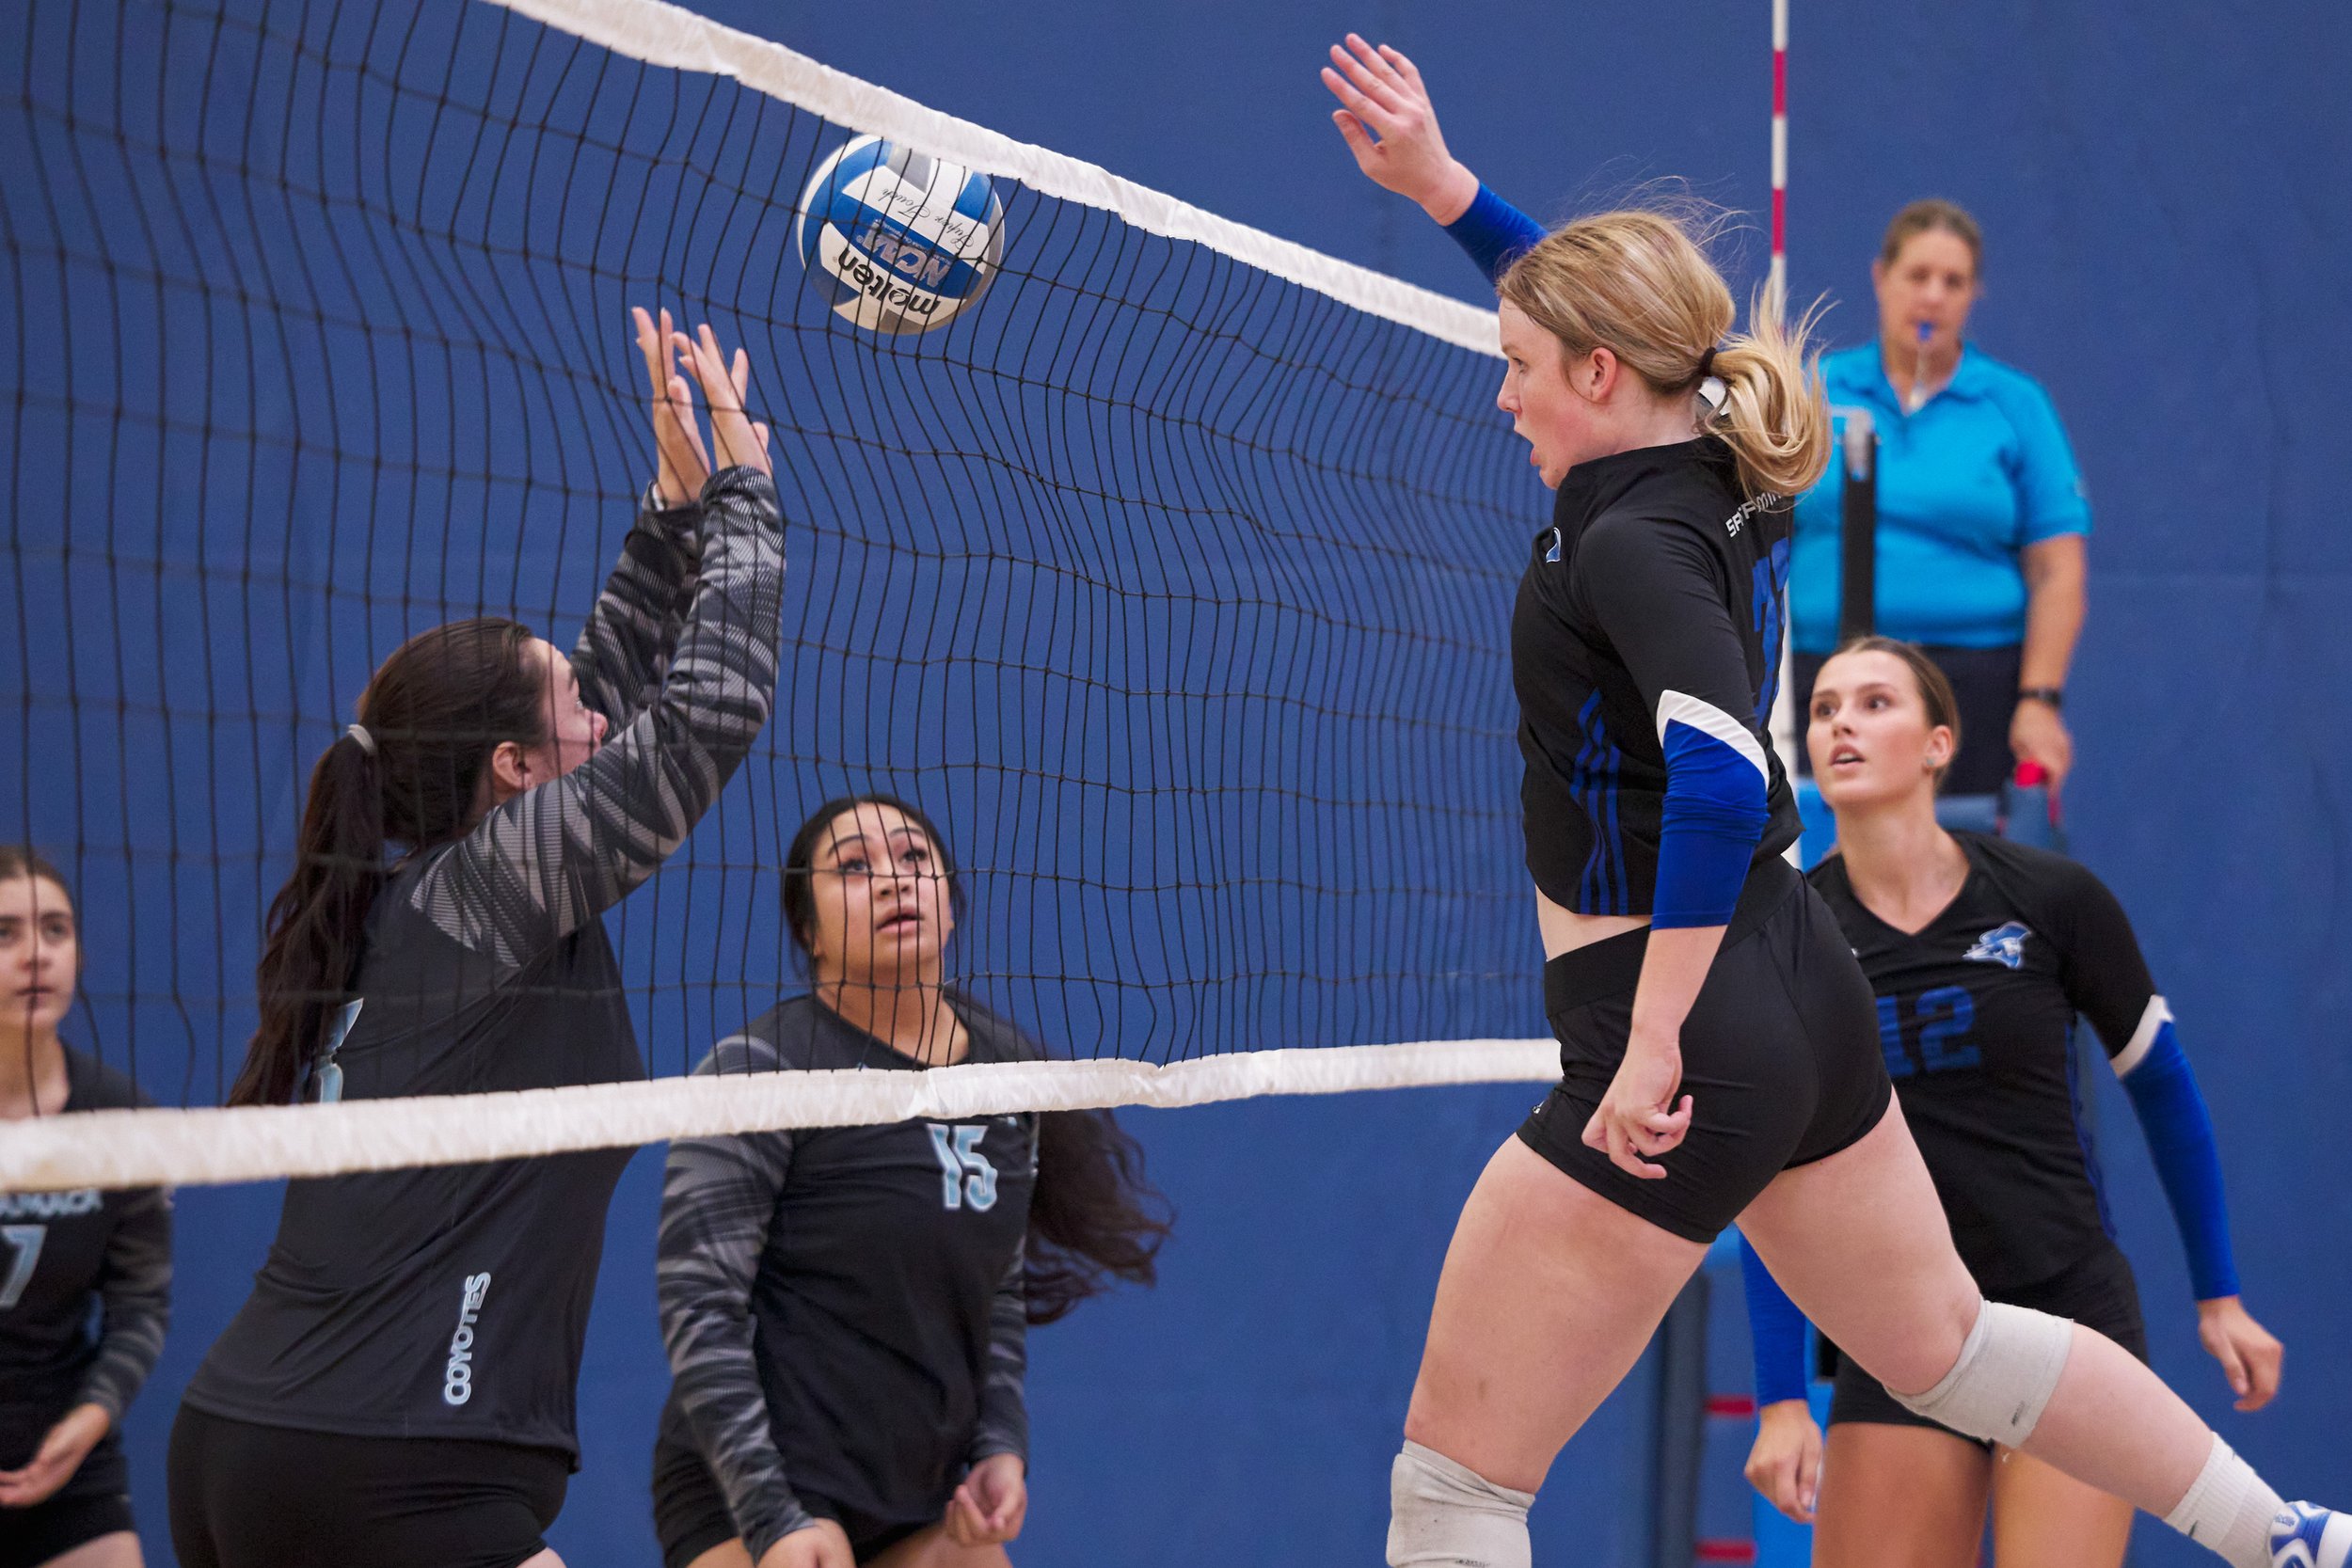  Santa Monica College Corsairs' Mylah Niksa (center right) scores a kill past Cuyamaca College Coyotes' Heather Johnson and Kierra Mamea during the women's volleyball match on Wednesday, Sept. 6, 2023, at the SMC Gym in Santa Monica, Calif. The Corsa